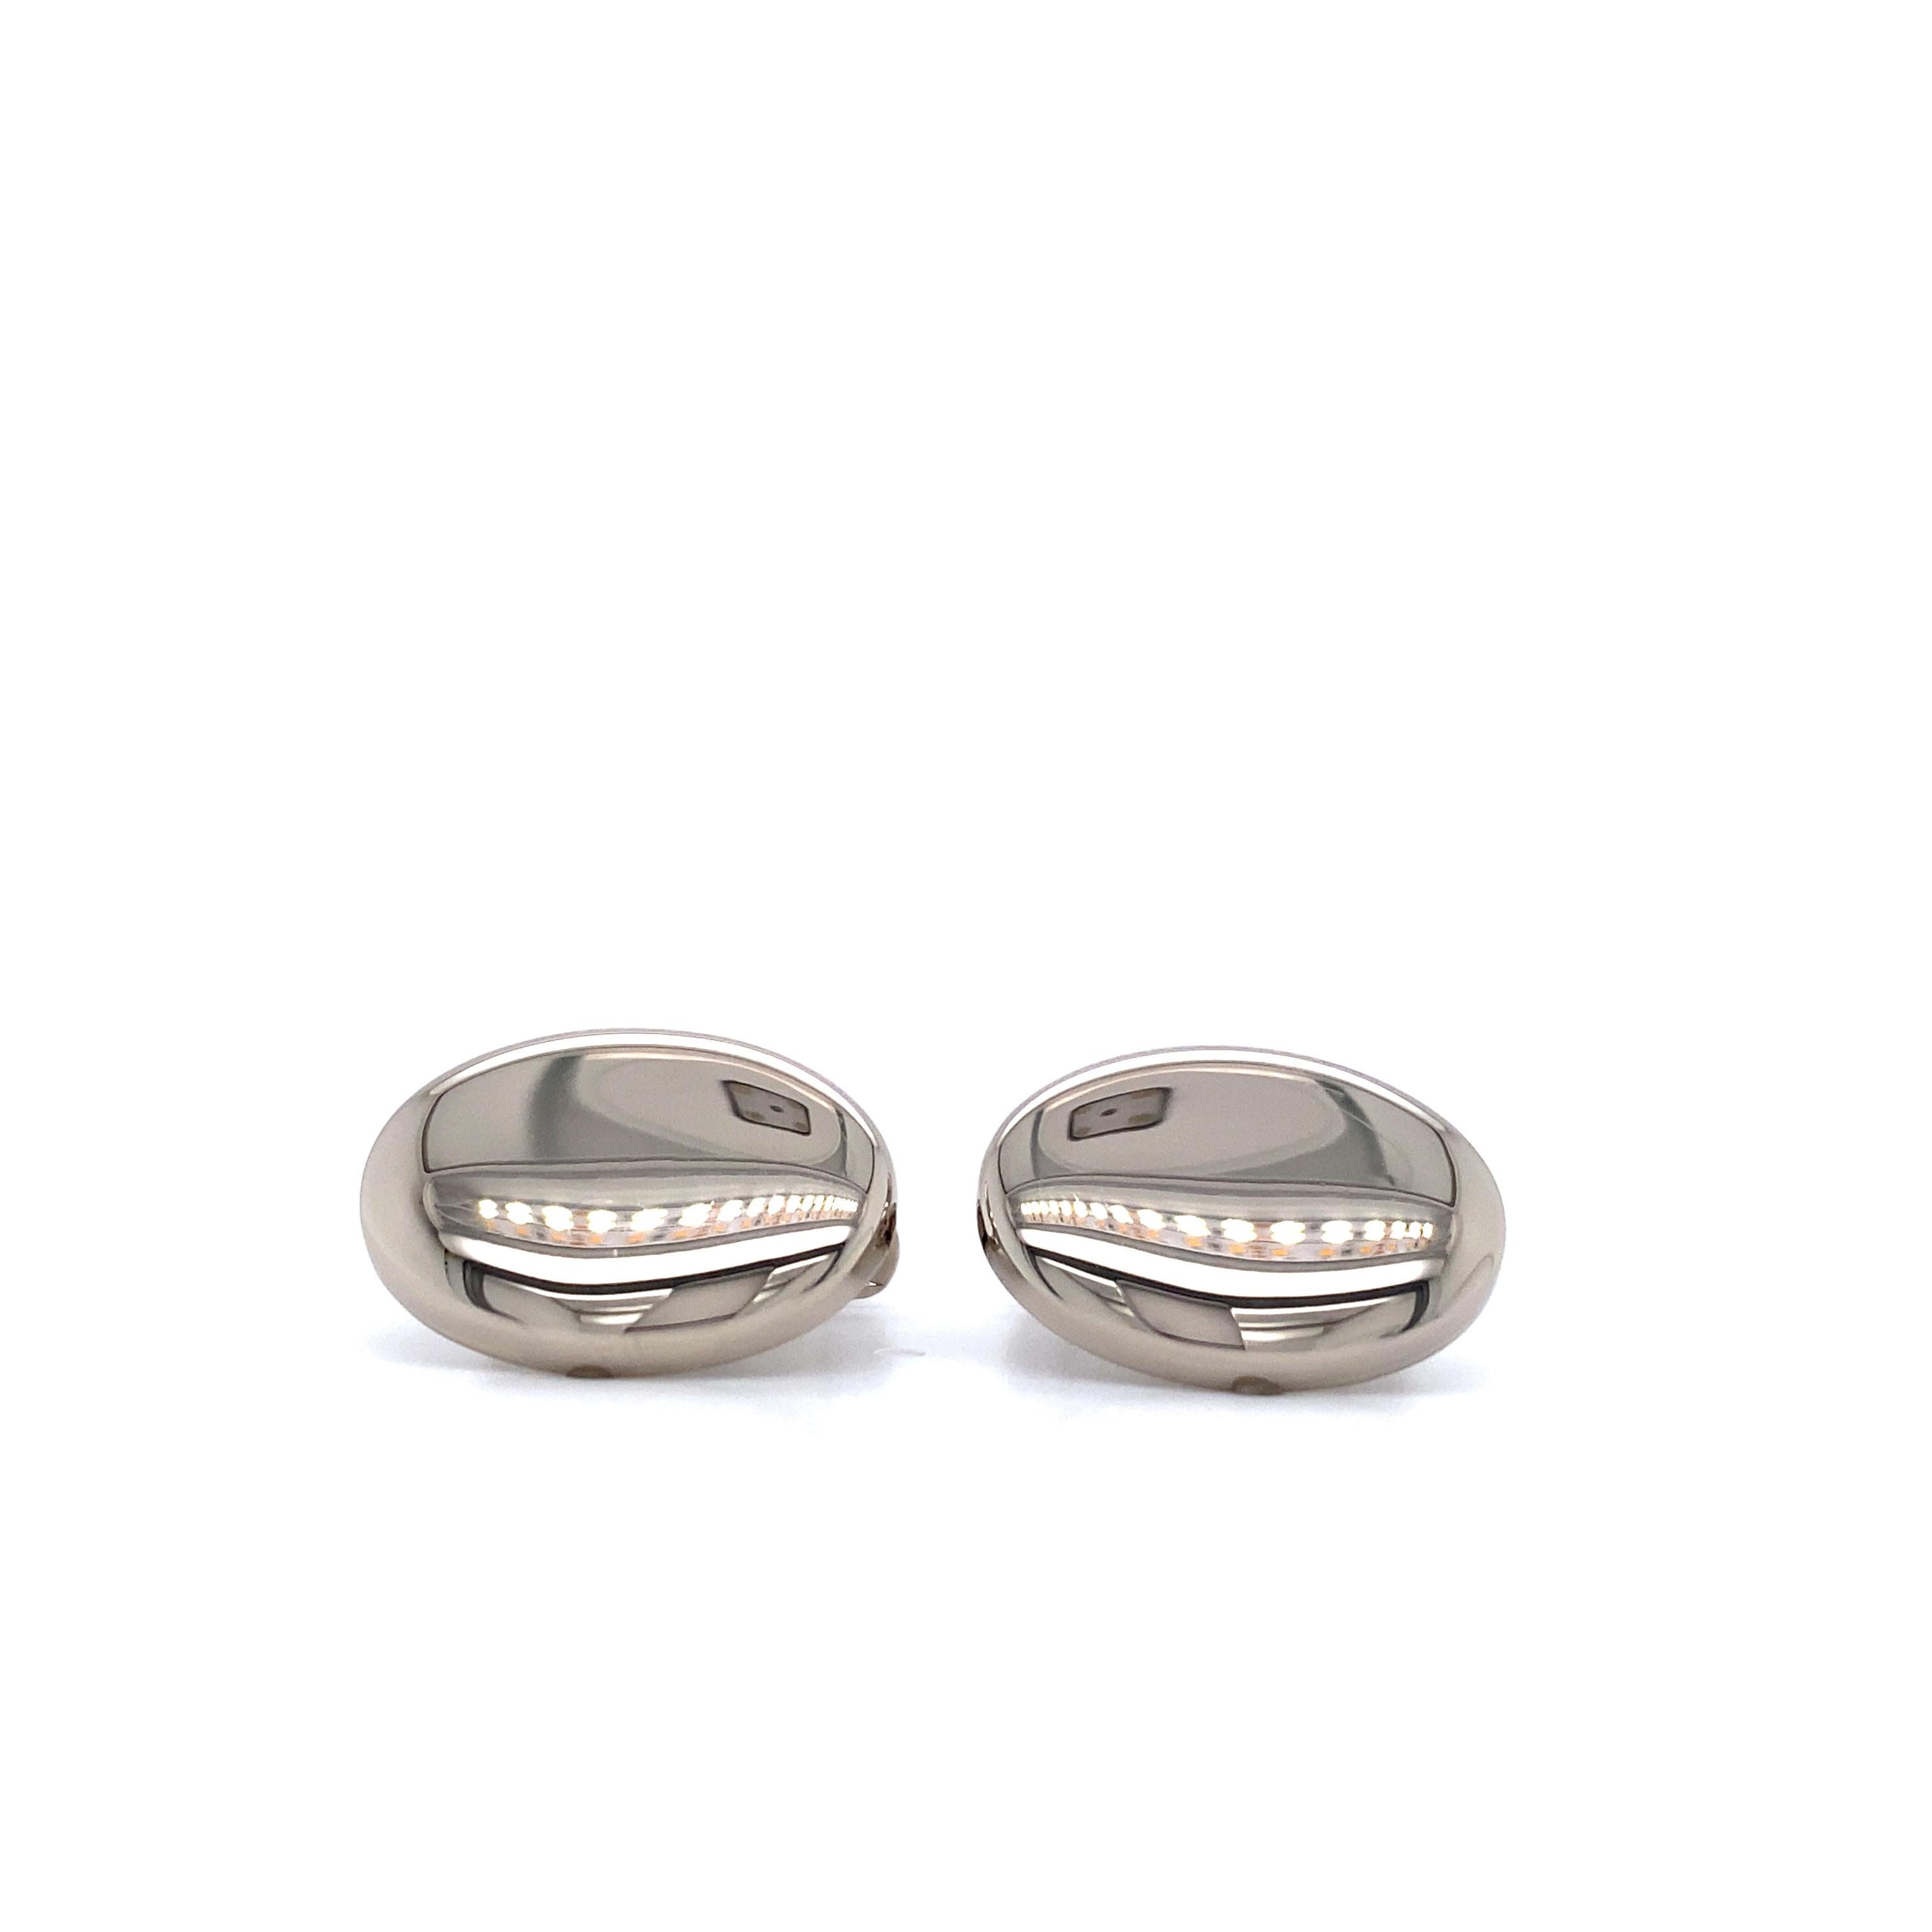 Victor Mayer oval cufflinks, 18k palladium white gold, Hallmark Collection, highly polished, measurements 15.7 mm x 20.8 mm

This cufflinks are made of high quality 18k white gold. The white color is created thanks to the addition of the white